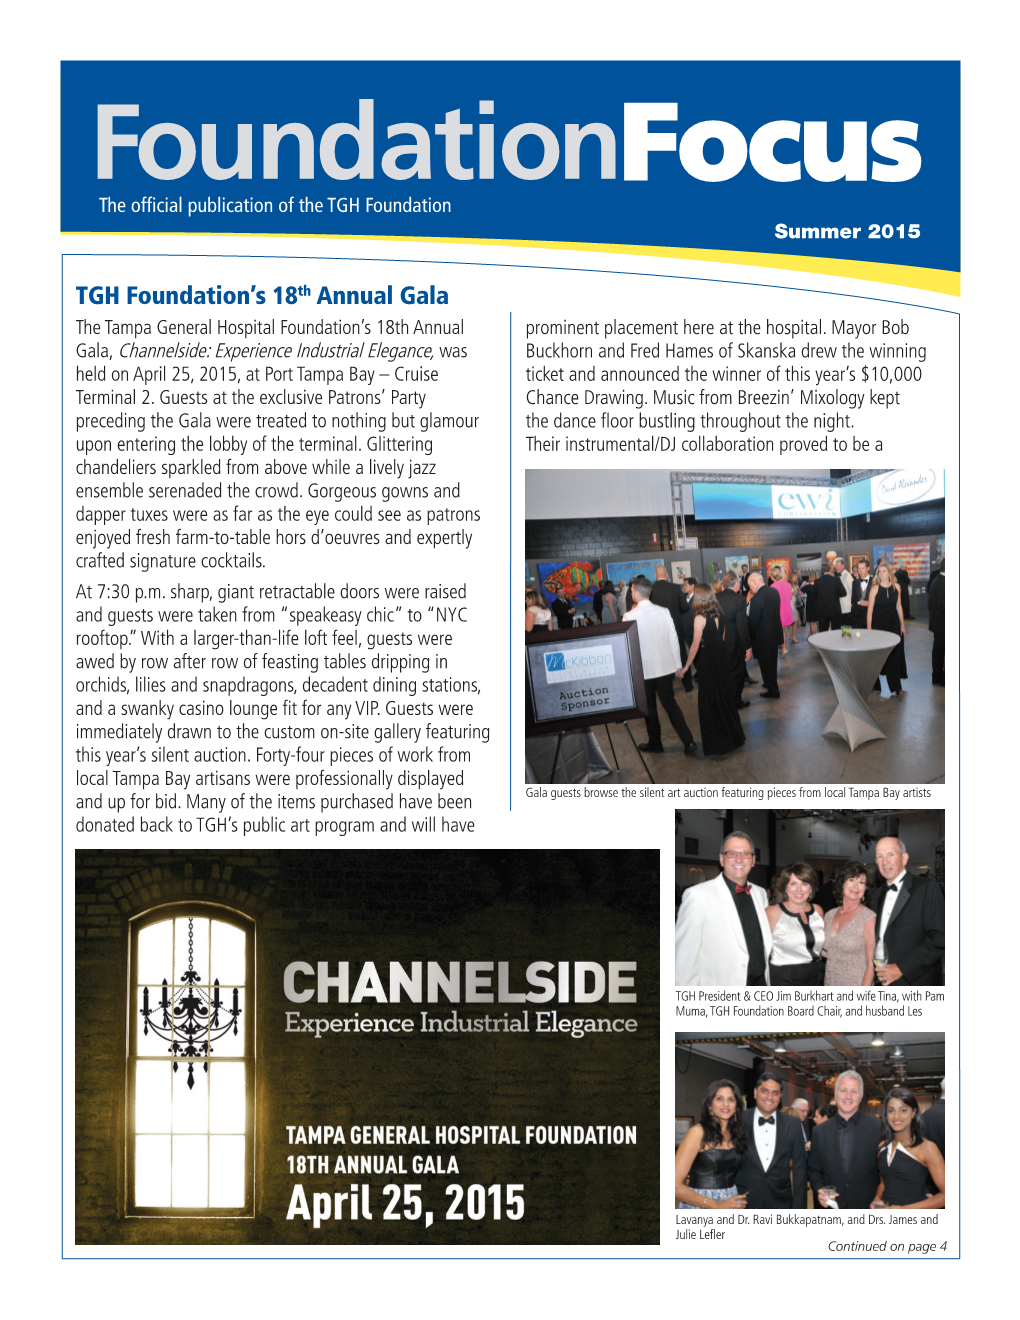 Foundationfocus the Official Publication of the TGH Foundation Summer 2015